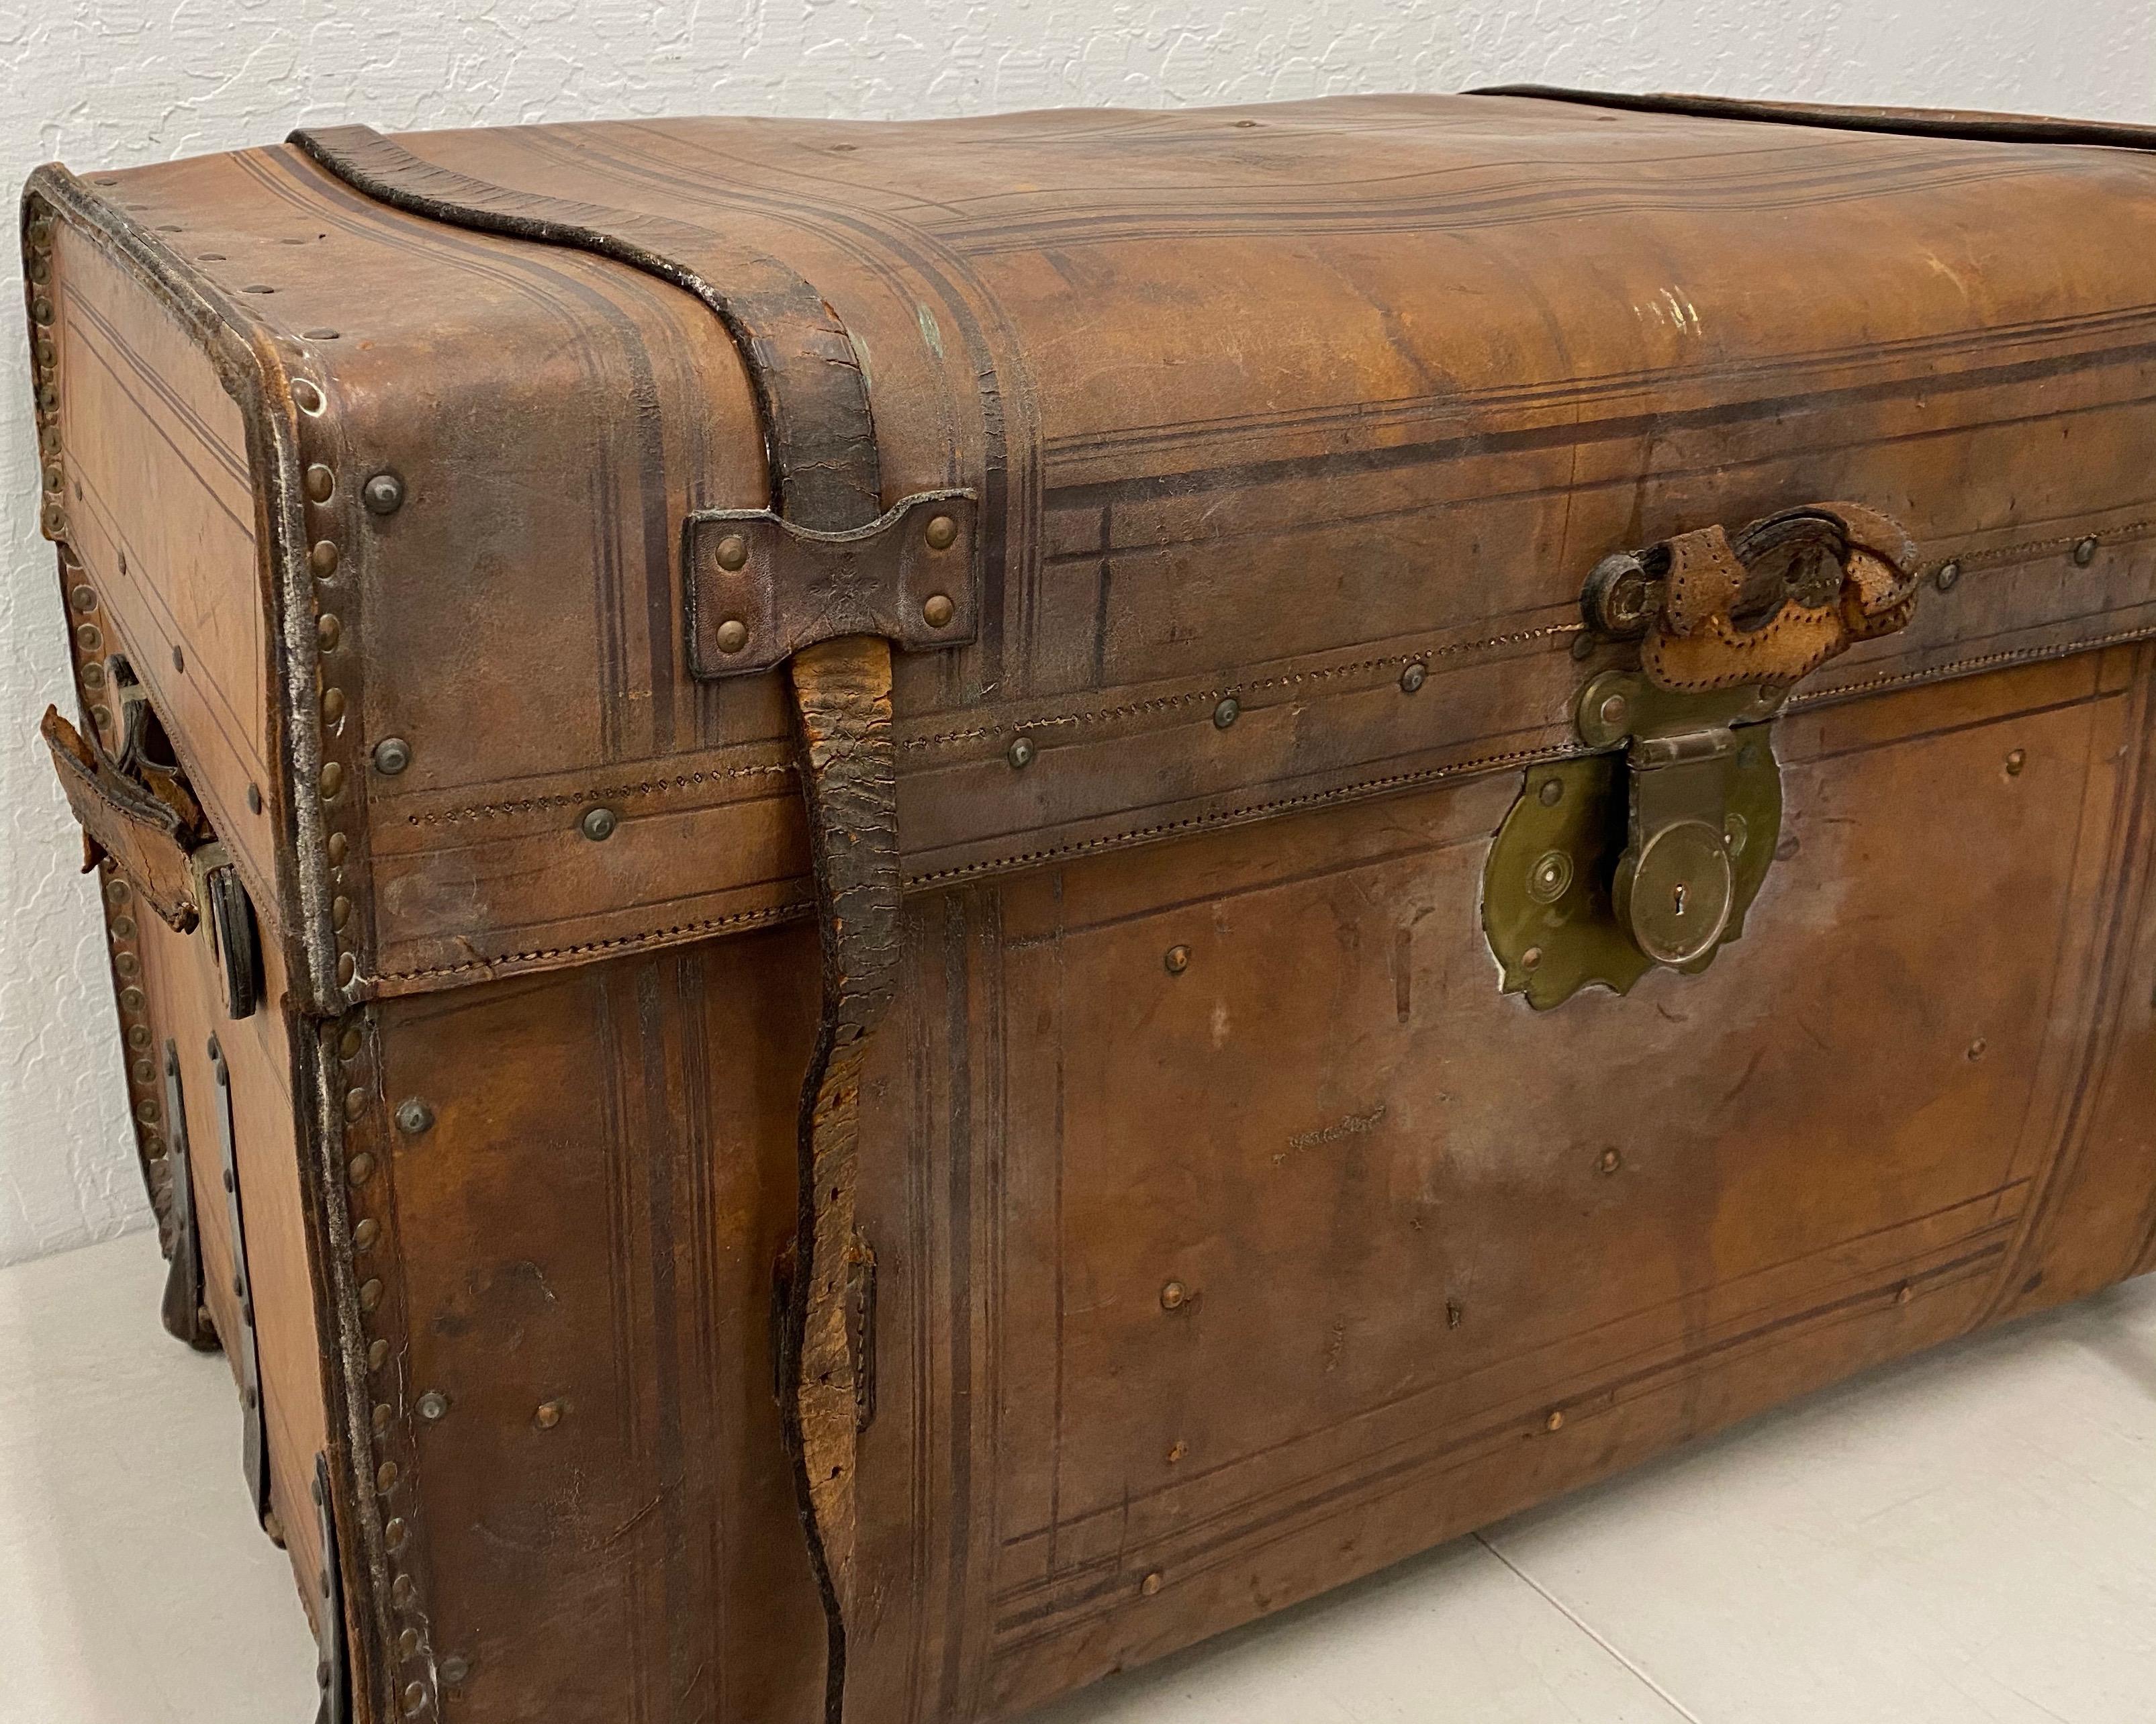 19th century leather and brass tack steamer trunk, circa 1880s

Fantastic antique leather trunk with padded fabric lining.

The leather is supported at the edges with brass tacks. All original. The trunk has a rich patina.

Great for a blanket